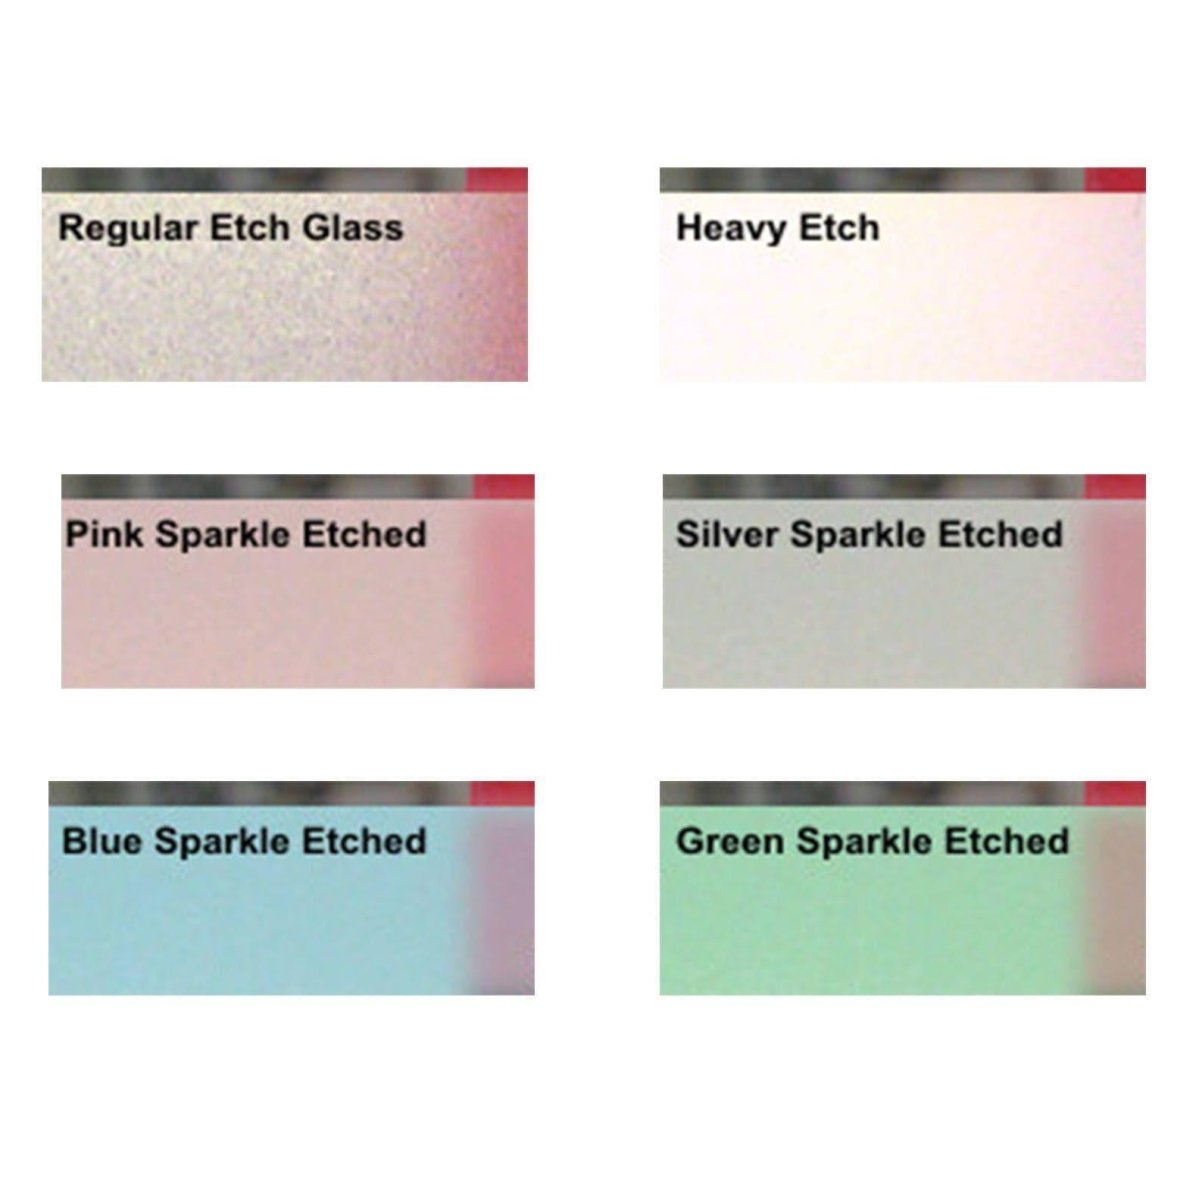 Elegant Privacy Glass Decal: Enhance Your Space with Style and Privacy - Decords